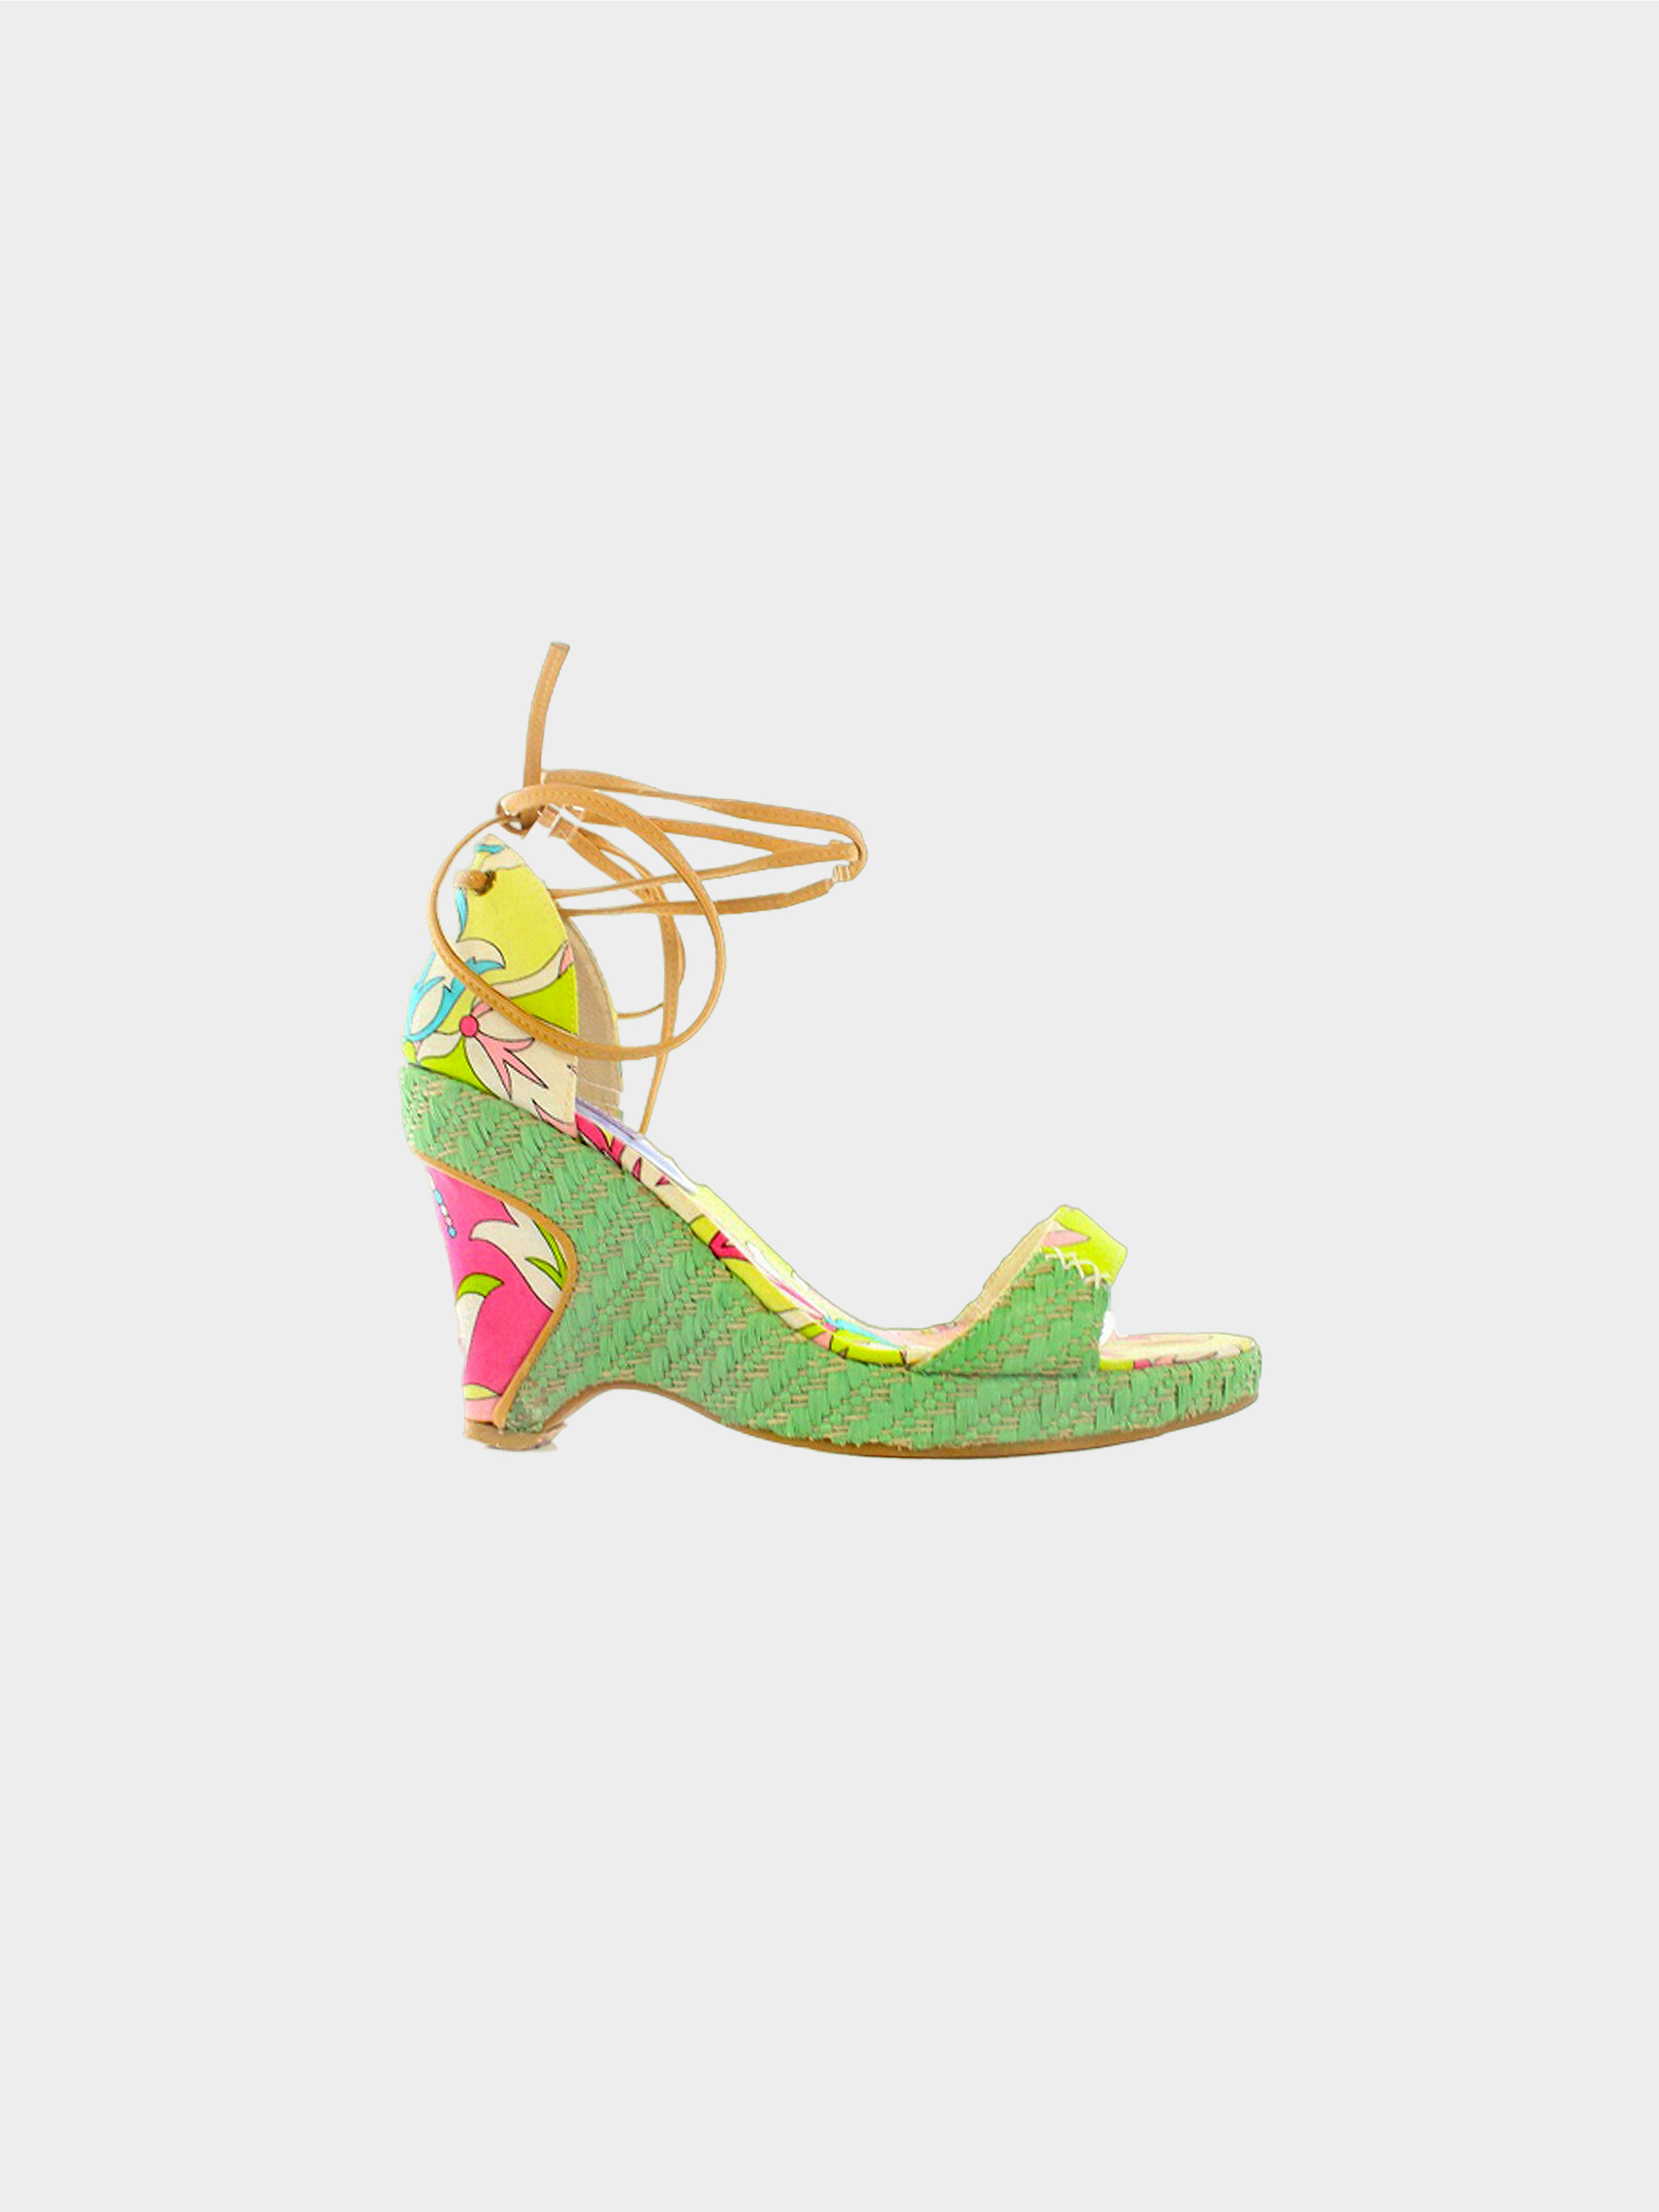 Emilio Pucci 2000s Floral Print Lace up Wedged Heels